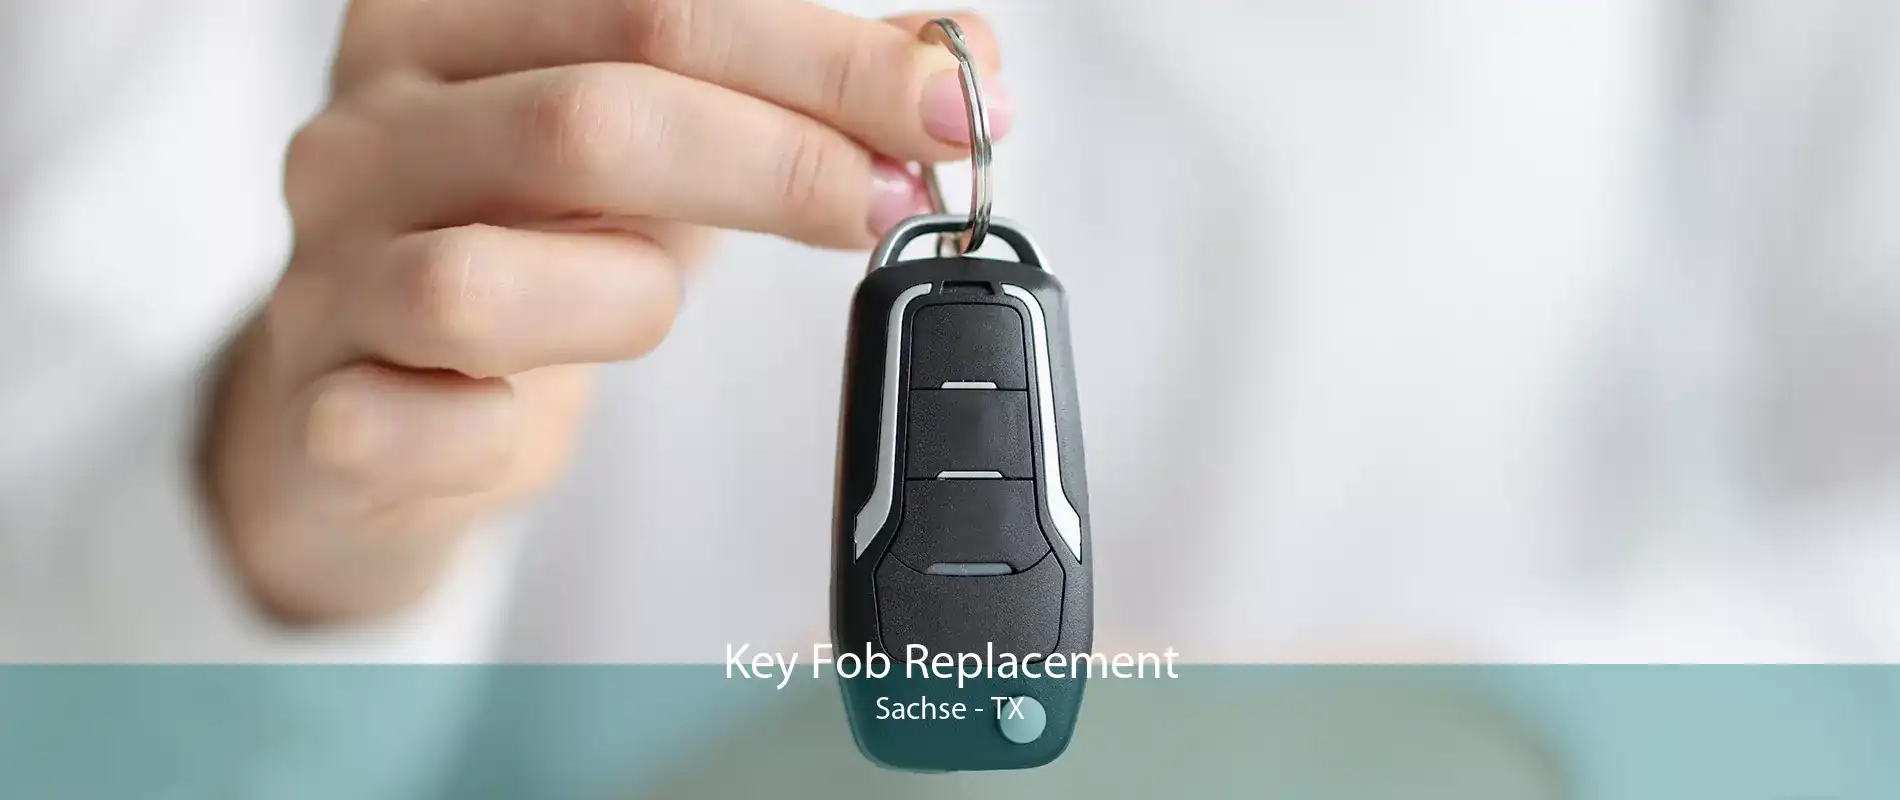 Key Fob Replacement Sachse - TX